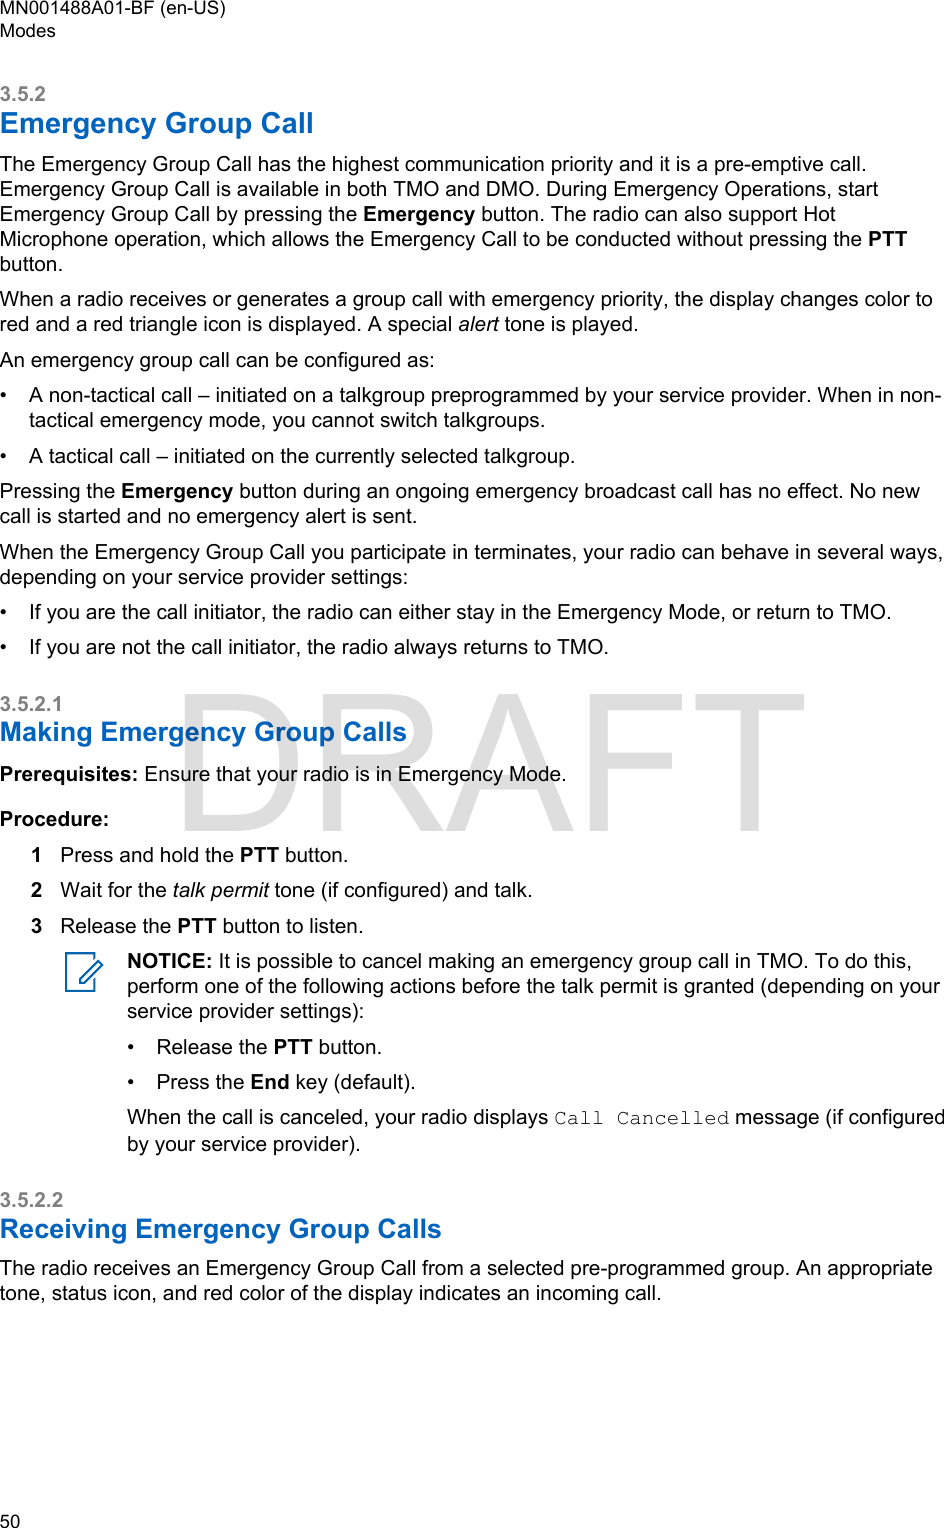 3.5.2Emergency Group CallThe Emergency Group Call has the highest communication priority and it is a pre-emptive call.Emergency Group Call is available in both TMO and DMO. During Emergency Operations, startEmergency Group Call by pressing the Emergency button. The radio can also support HotMicrophone operation, which allows the Emergency Call to be conducted without pressing the PTTbutton.When a radio receives or generates a group call with emergency priority, the display changes color tored and a red triangle icon is displayed. A special alert tone is played.An emergency group call can be configured as:•A non-tactical call – initiated on a talkgroup preprogrammed by your service provider. When in non-tactical emergency mode, you cannot switch talkgroups.• A tactical call – initiated on the currently selected talkgroup.Pressing the Emergency button during an ongoing emergency broadcast call has no effect. No newcall is started and no emergency alert is sent.When the Emergency Group Call you participate in terminates, your radio can behave in several ways,depending on your service provider settings:• If you are the call initiator, the radio can either stay in the Emergency Mode, or return to TMO.• If you are not the call initiator, the radio always returns to TMO.3.5.2.1Making Emergency Group CallsPrerequisites: Ensure that your radio is in Emergency Mode.Procedure:1Press and hold the PTT button.2Wait for the talk permit tone (if configured) and talk.3Release the PTT button to listen.NOTICE: It is possible to cancel making an emergency group call in TMO. To do this,perform one of the following actions before the talk permit is granted (depending on yourservice provider settings):•Release the PTT button.• Press the End key (default).When the call is canceled, your radio displays Call Cancelled message (if configuredby your service provider).3.5.2.2Receiving Emergency Group CallsThe radio receives an Emergency Group Call from a selected pre-programmed group. An appropriatetone, status icon, and red color of the display indicates an incoming call.MN001488A01-BF (en-US)Modes50  DRAFT